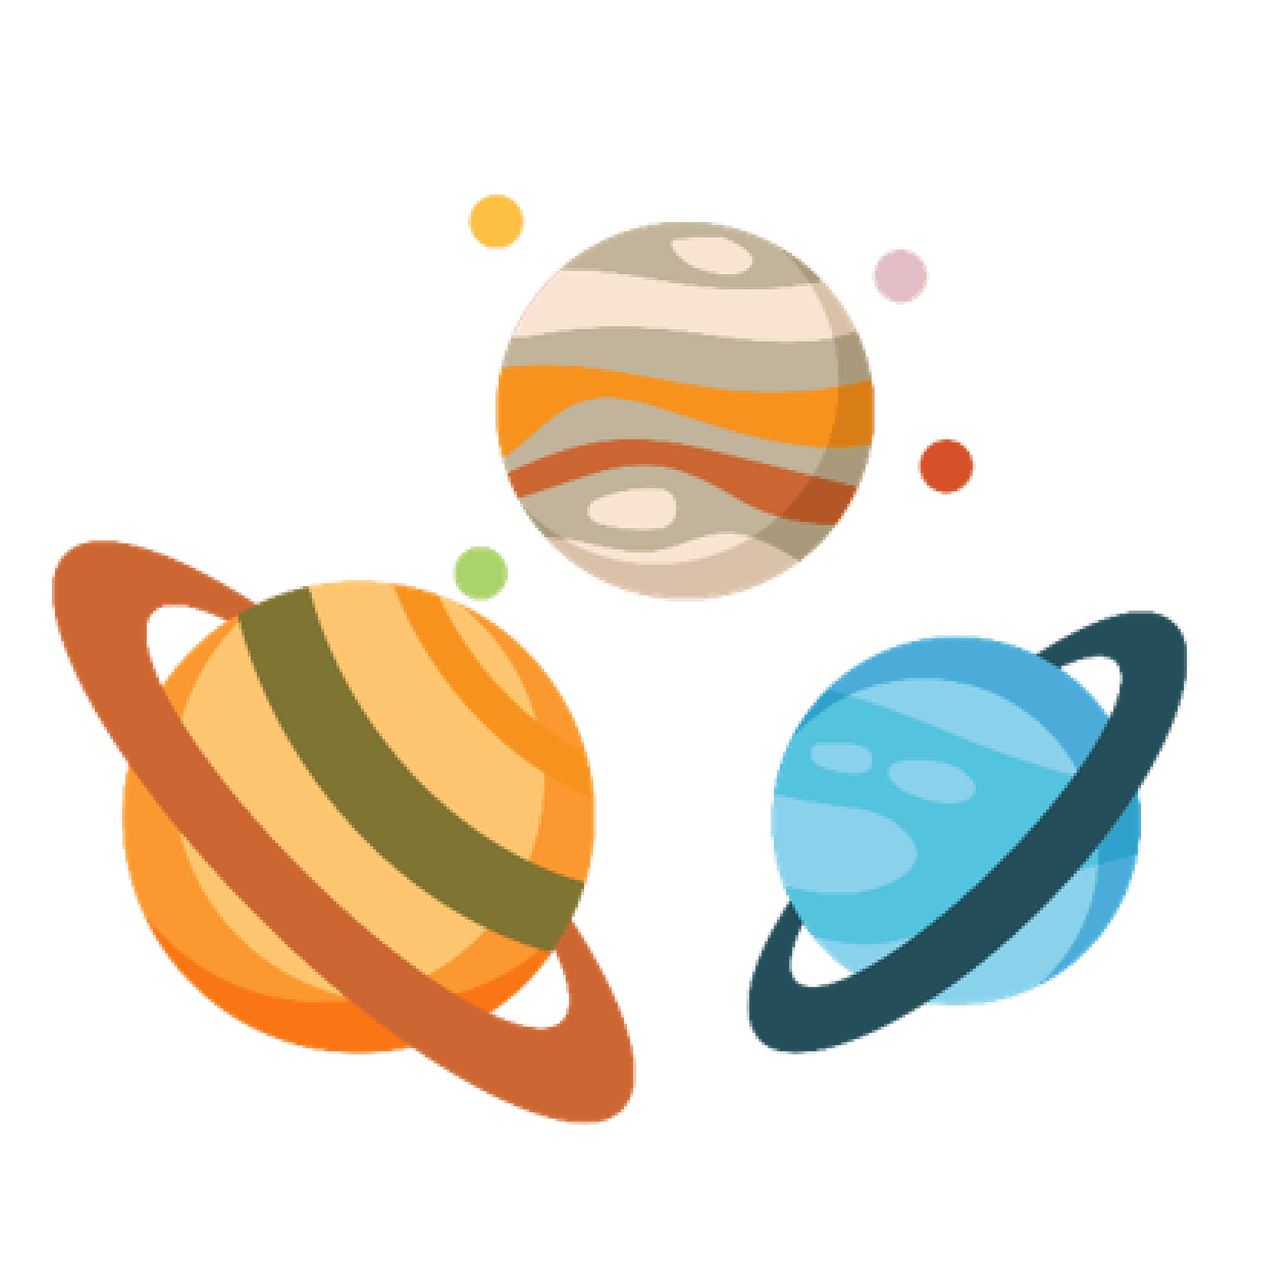 Cartoon drawing of planets